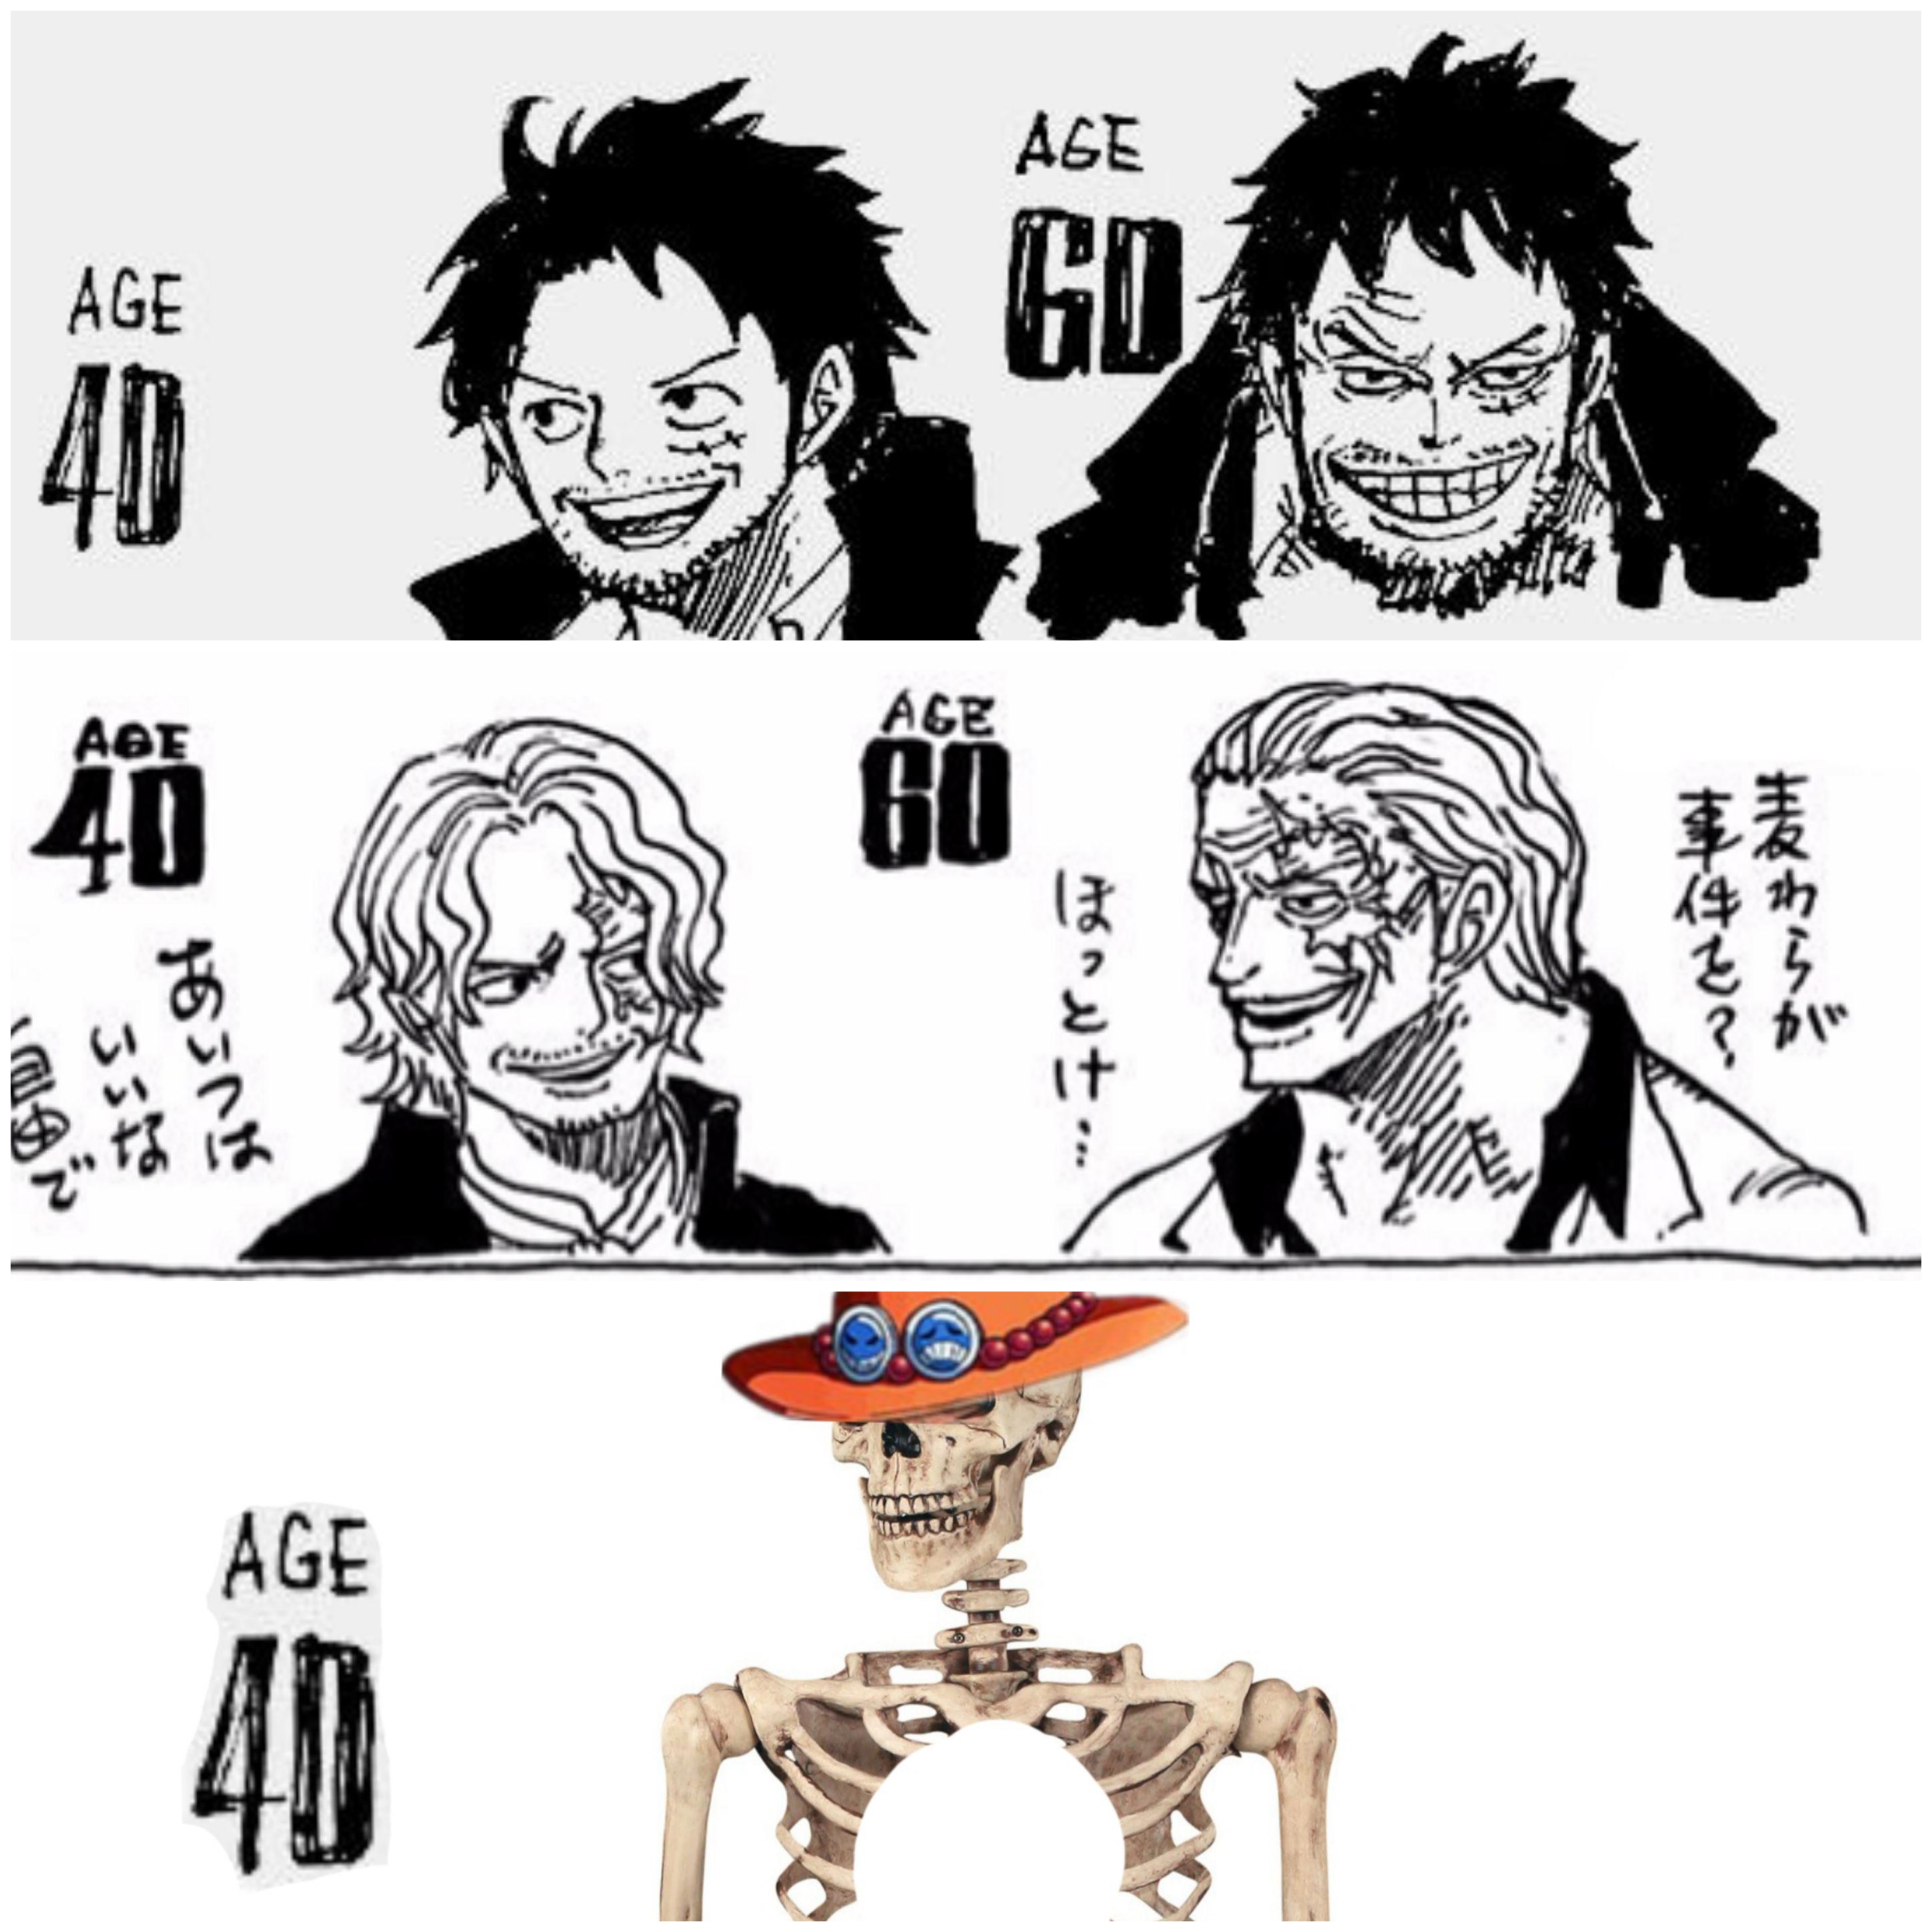 Luffy Age 40 And 60 - HD Wallpaper 